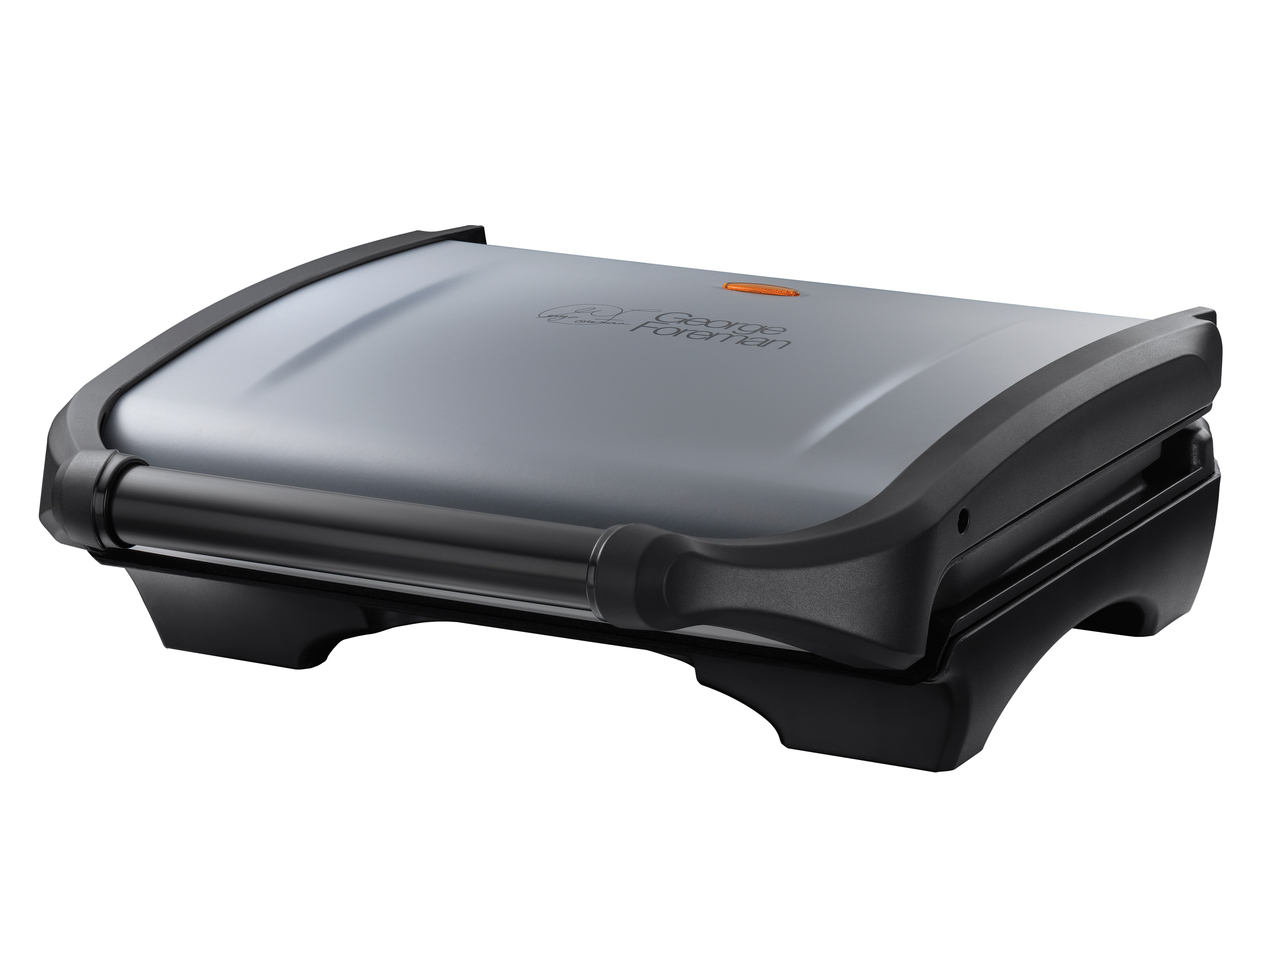 George Foreman 5-Portion Grill1